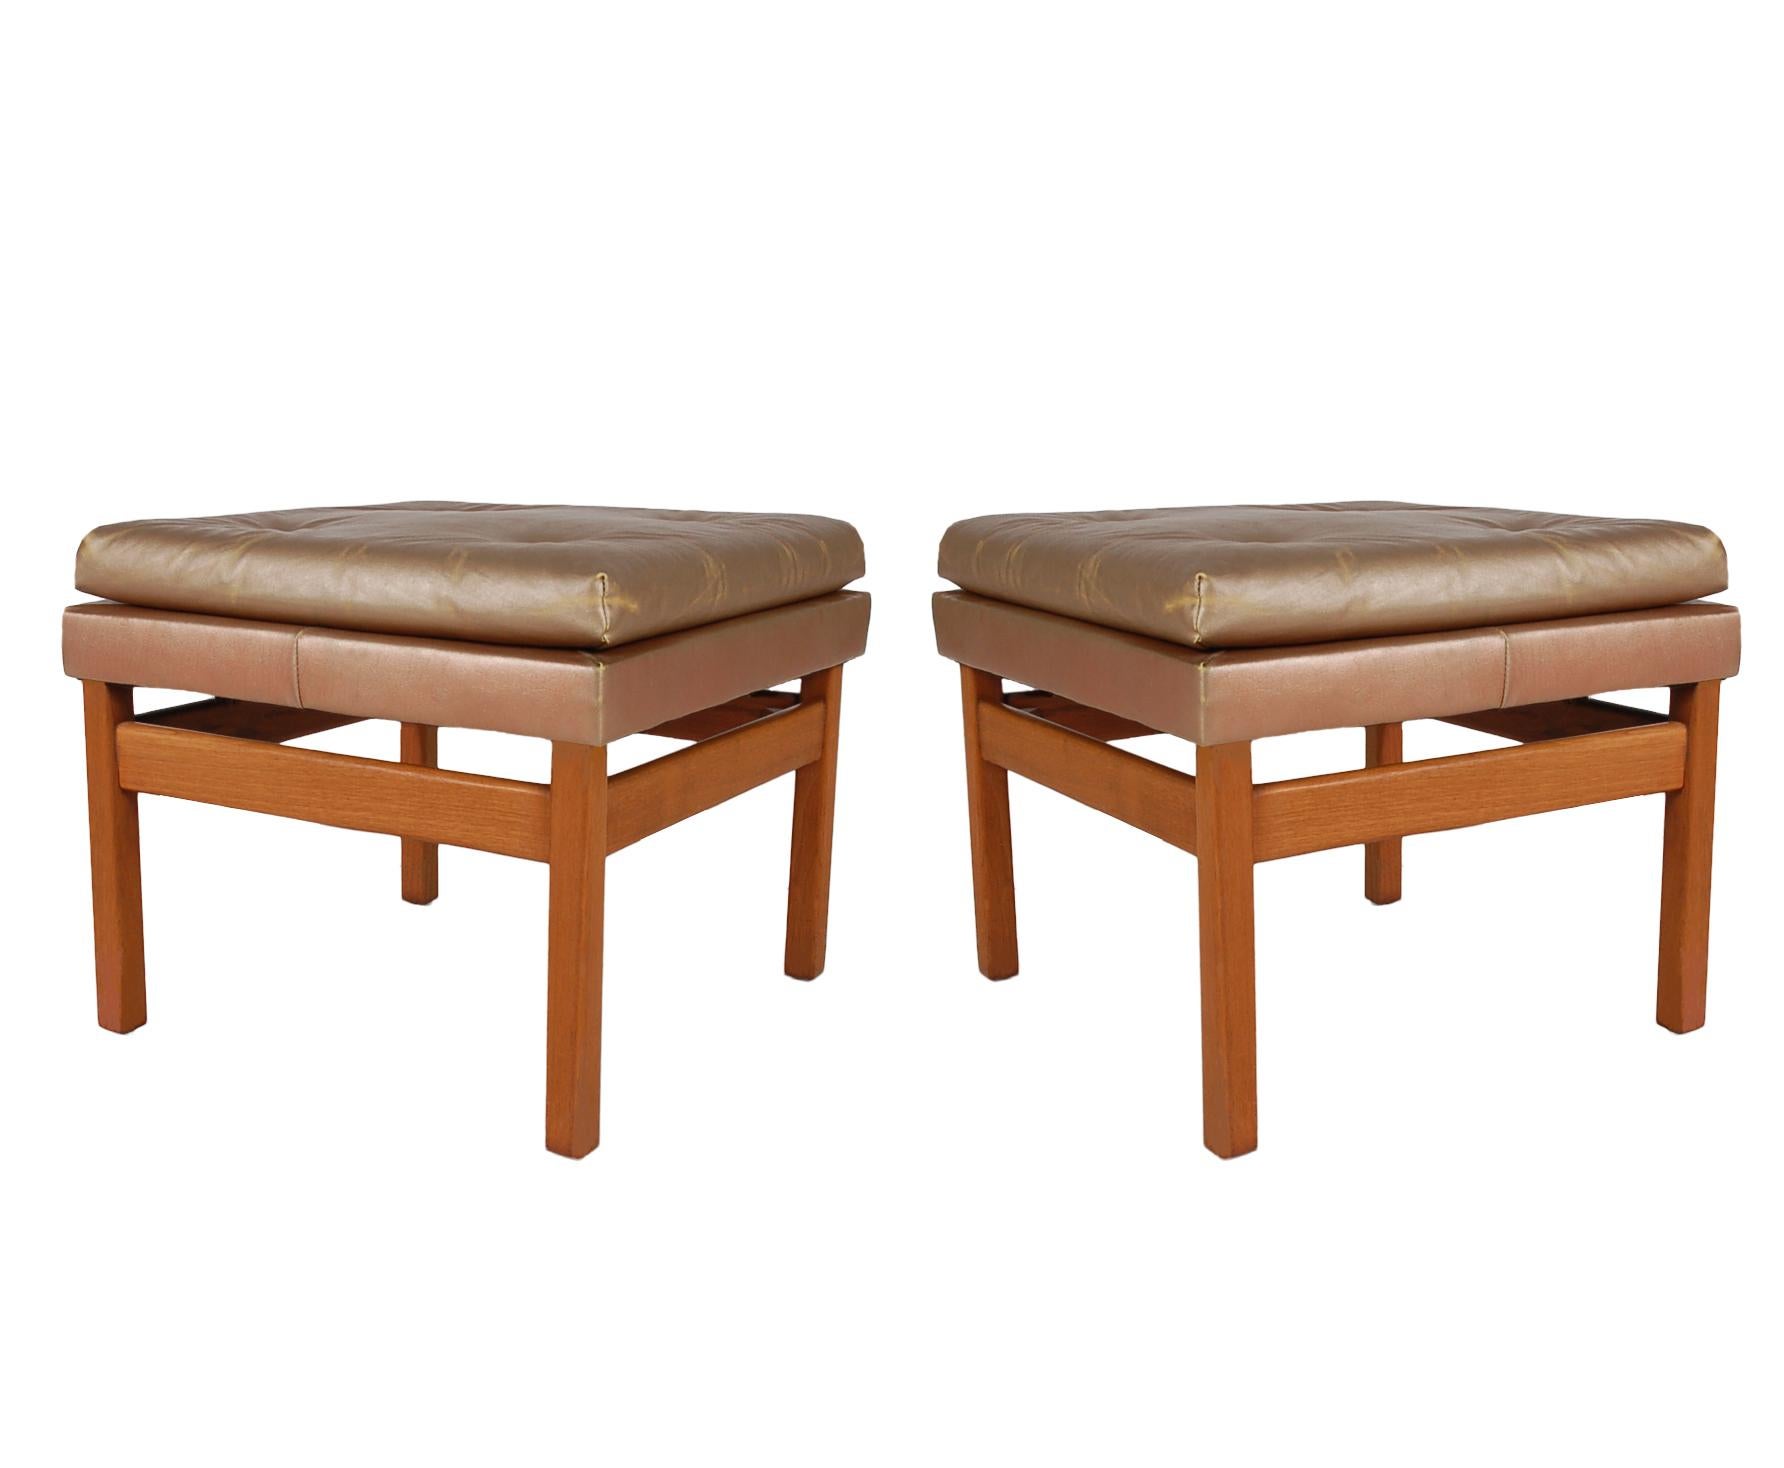 American Mid-Century Modern Upholstered and Wood Bench Set by Milo Baughman Thayer Coggin For Sale